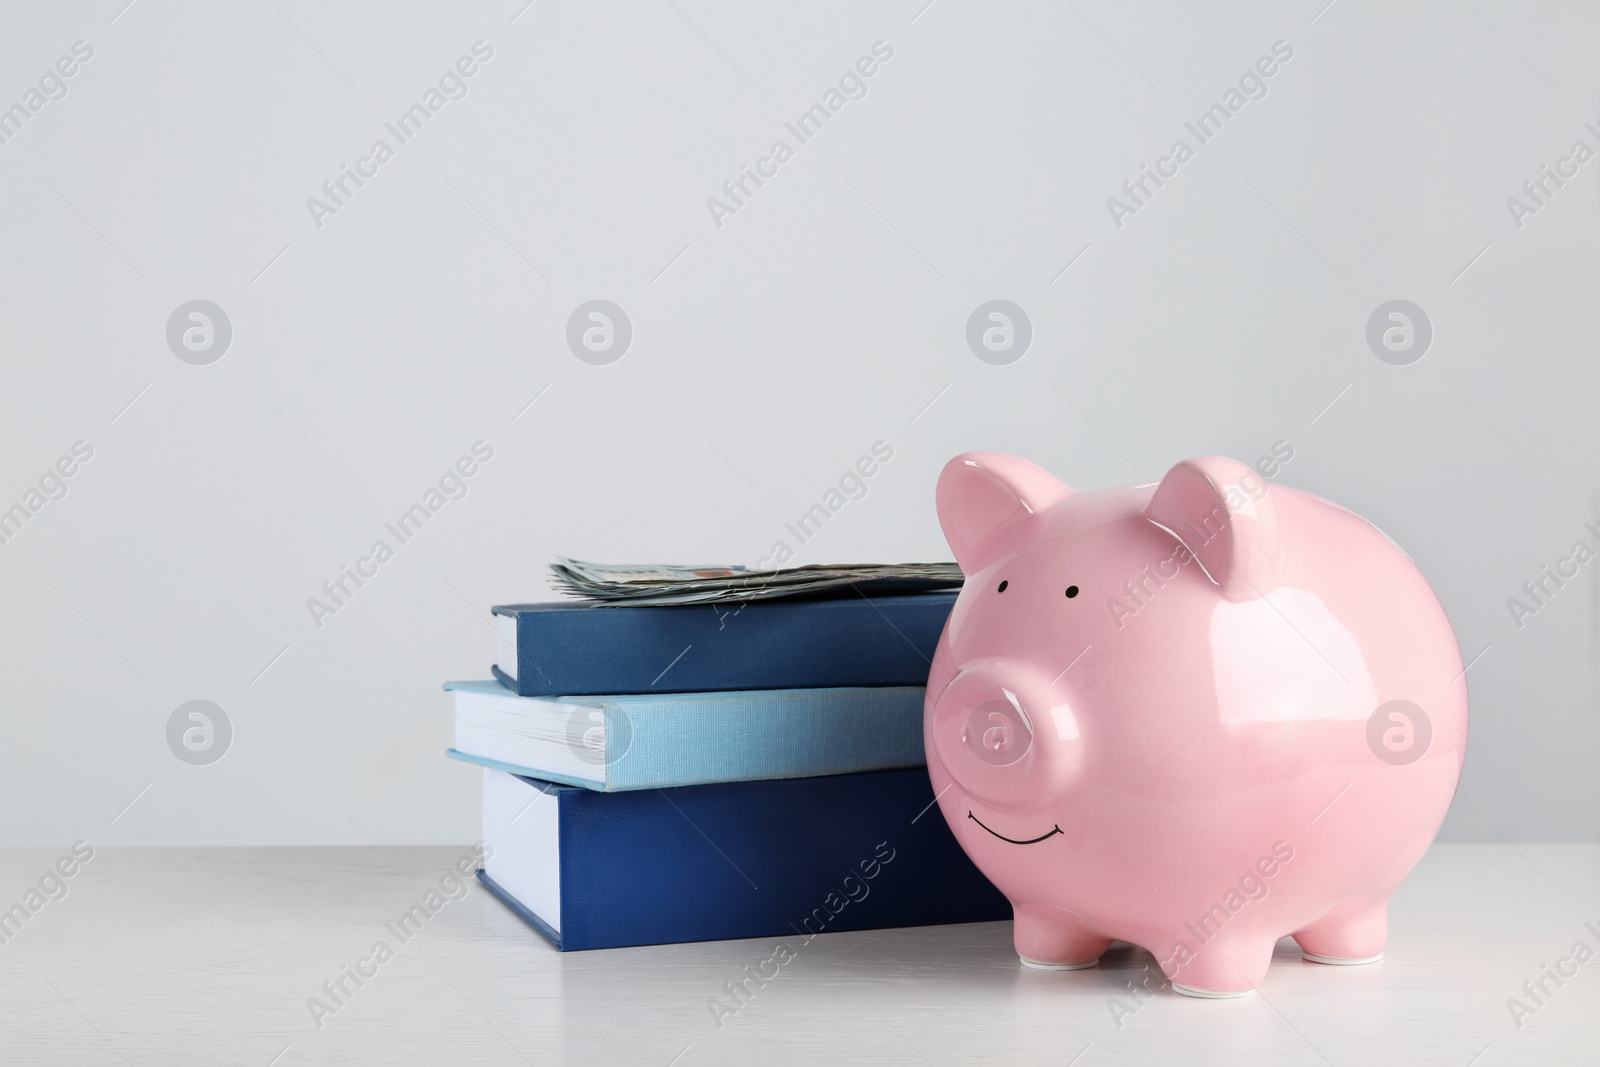 Photo of Piggy bank with dollars and books on table against white background. Space for text